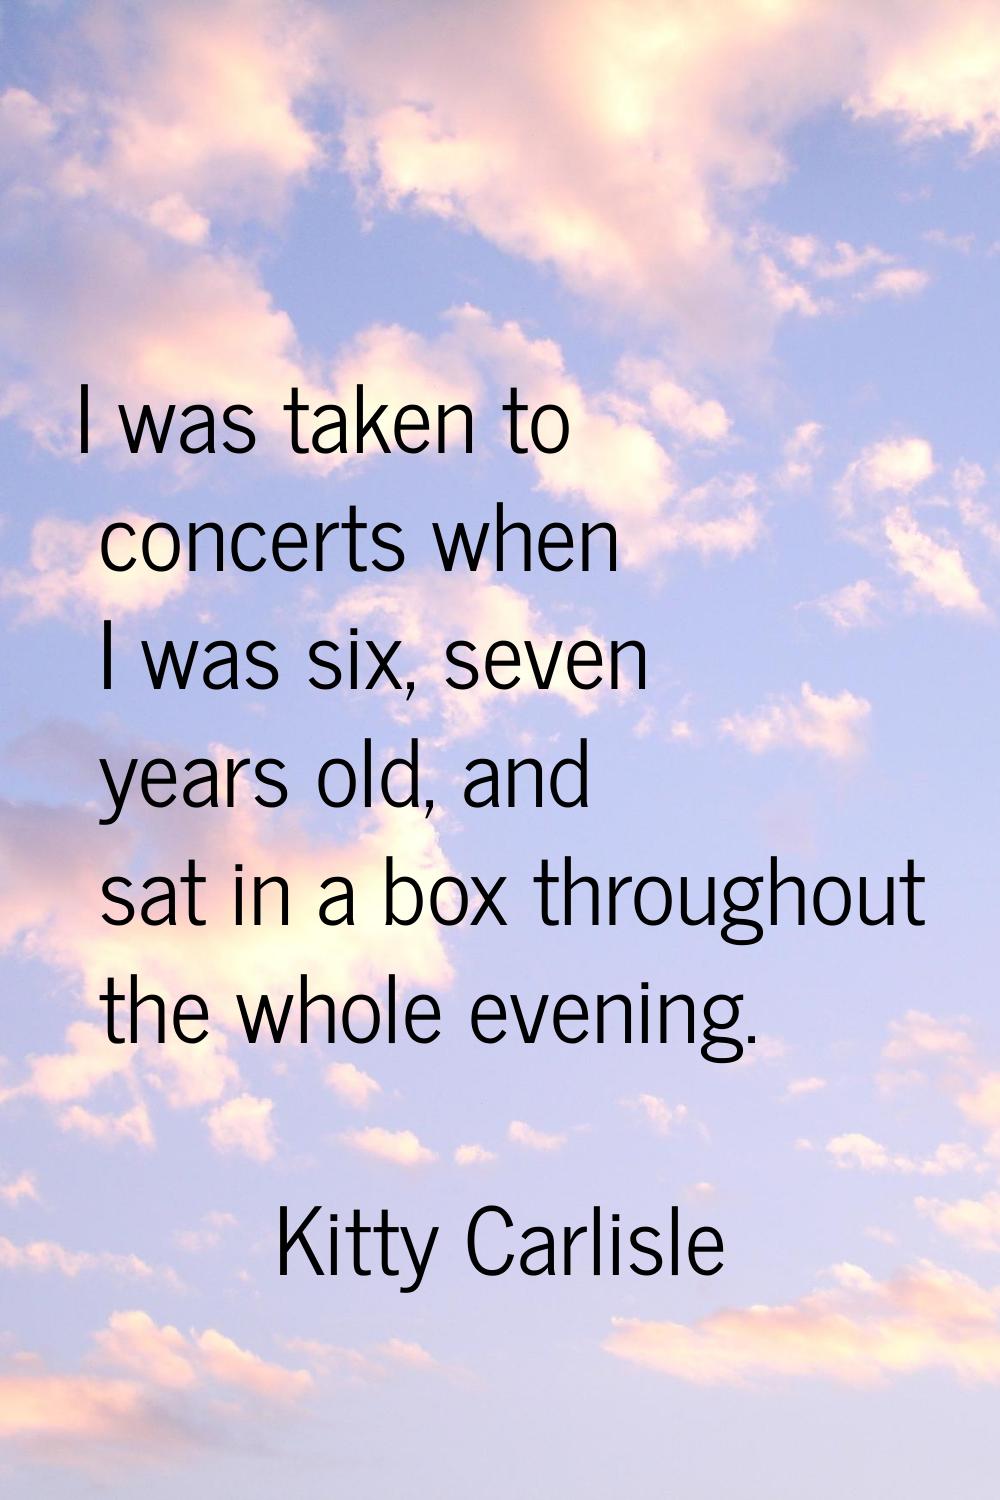 I was taken to concerts when I was six, seven years old, and sat in a box throughout the whole even